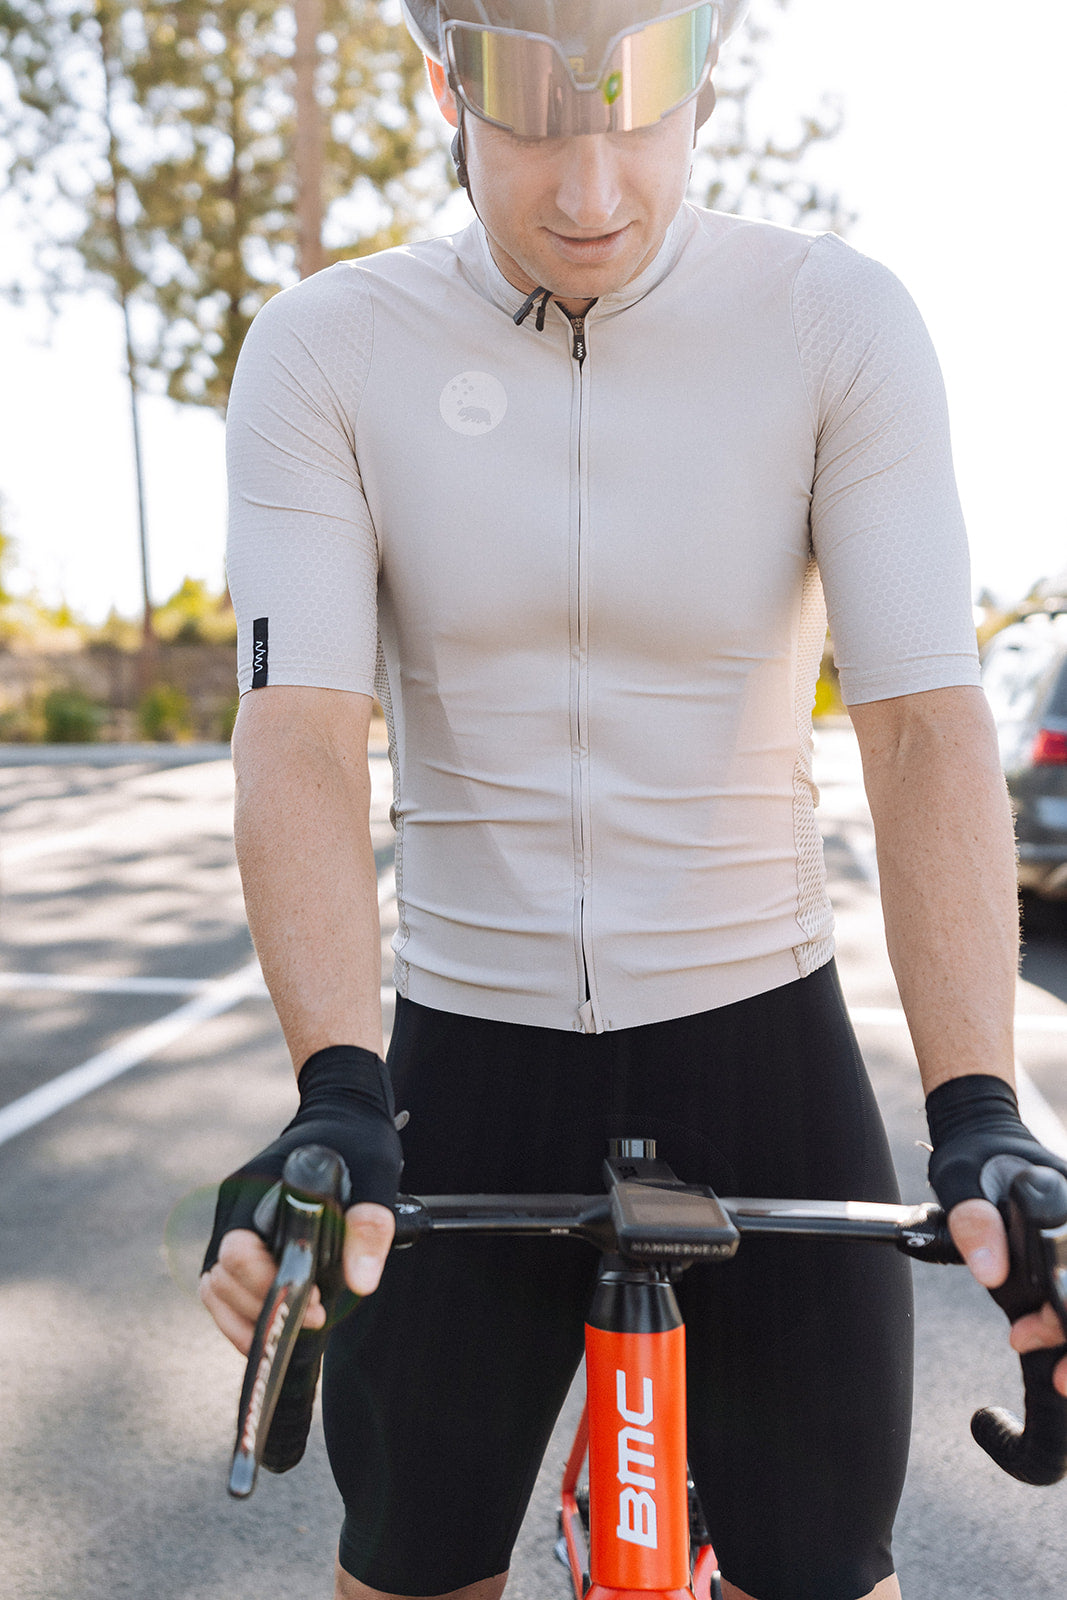 men's LUCEO hex racer cycling jersey - champagne